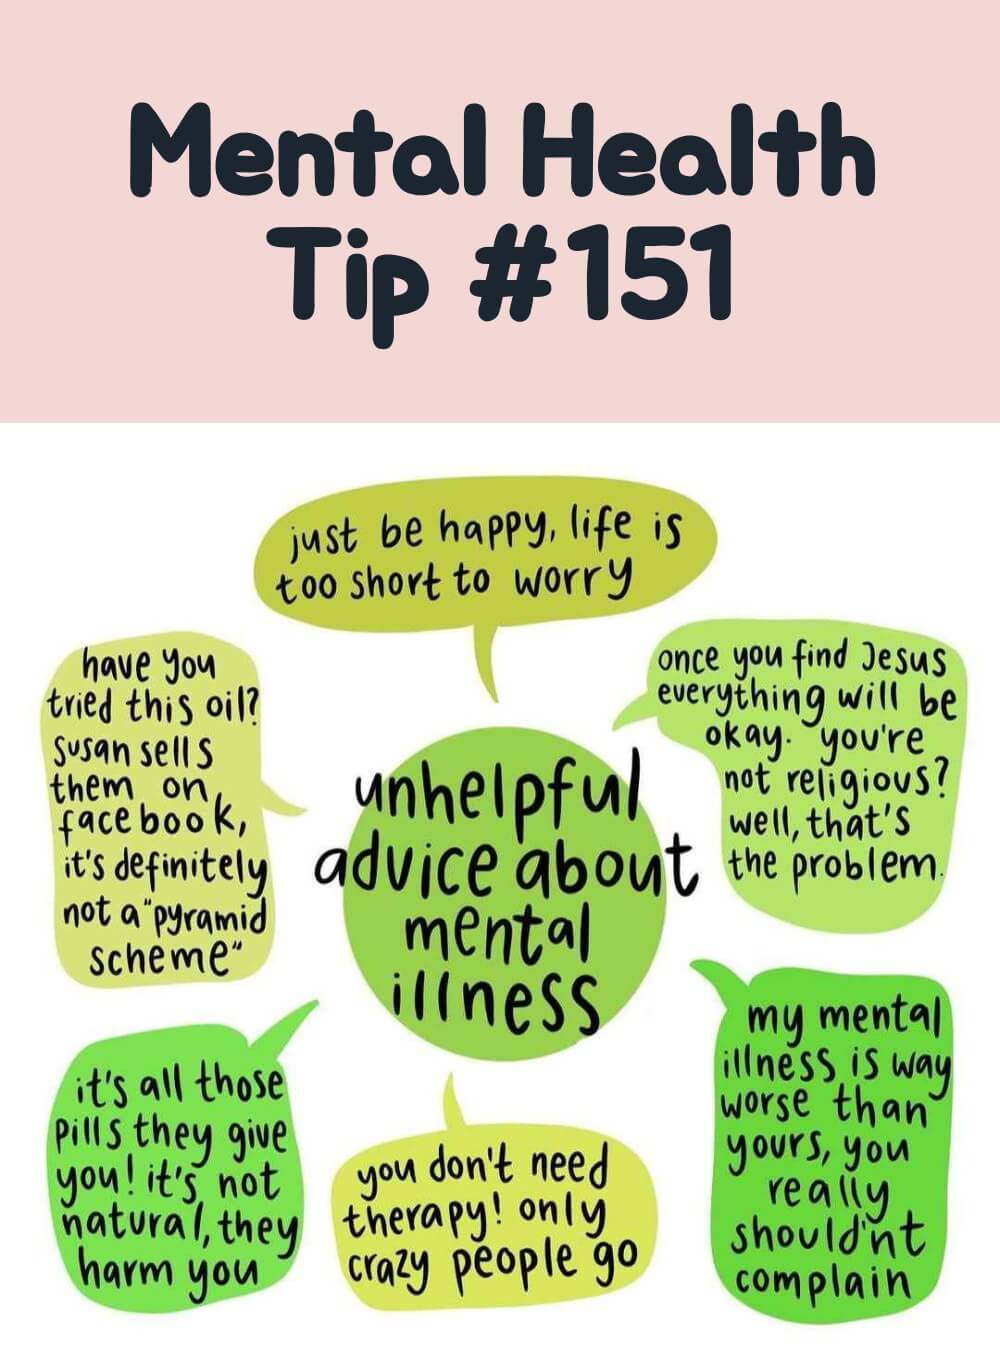 Emotional Well-being Infographic | Mental Health Tip #151